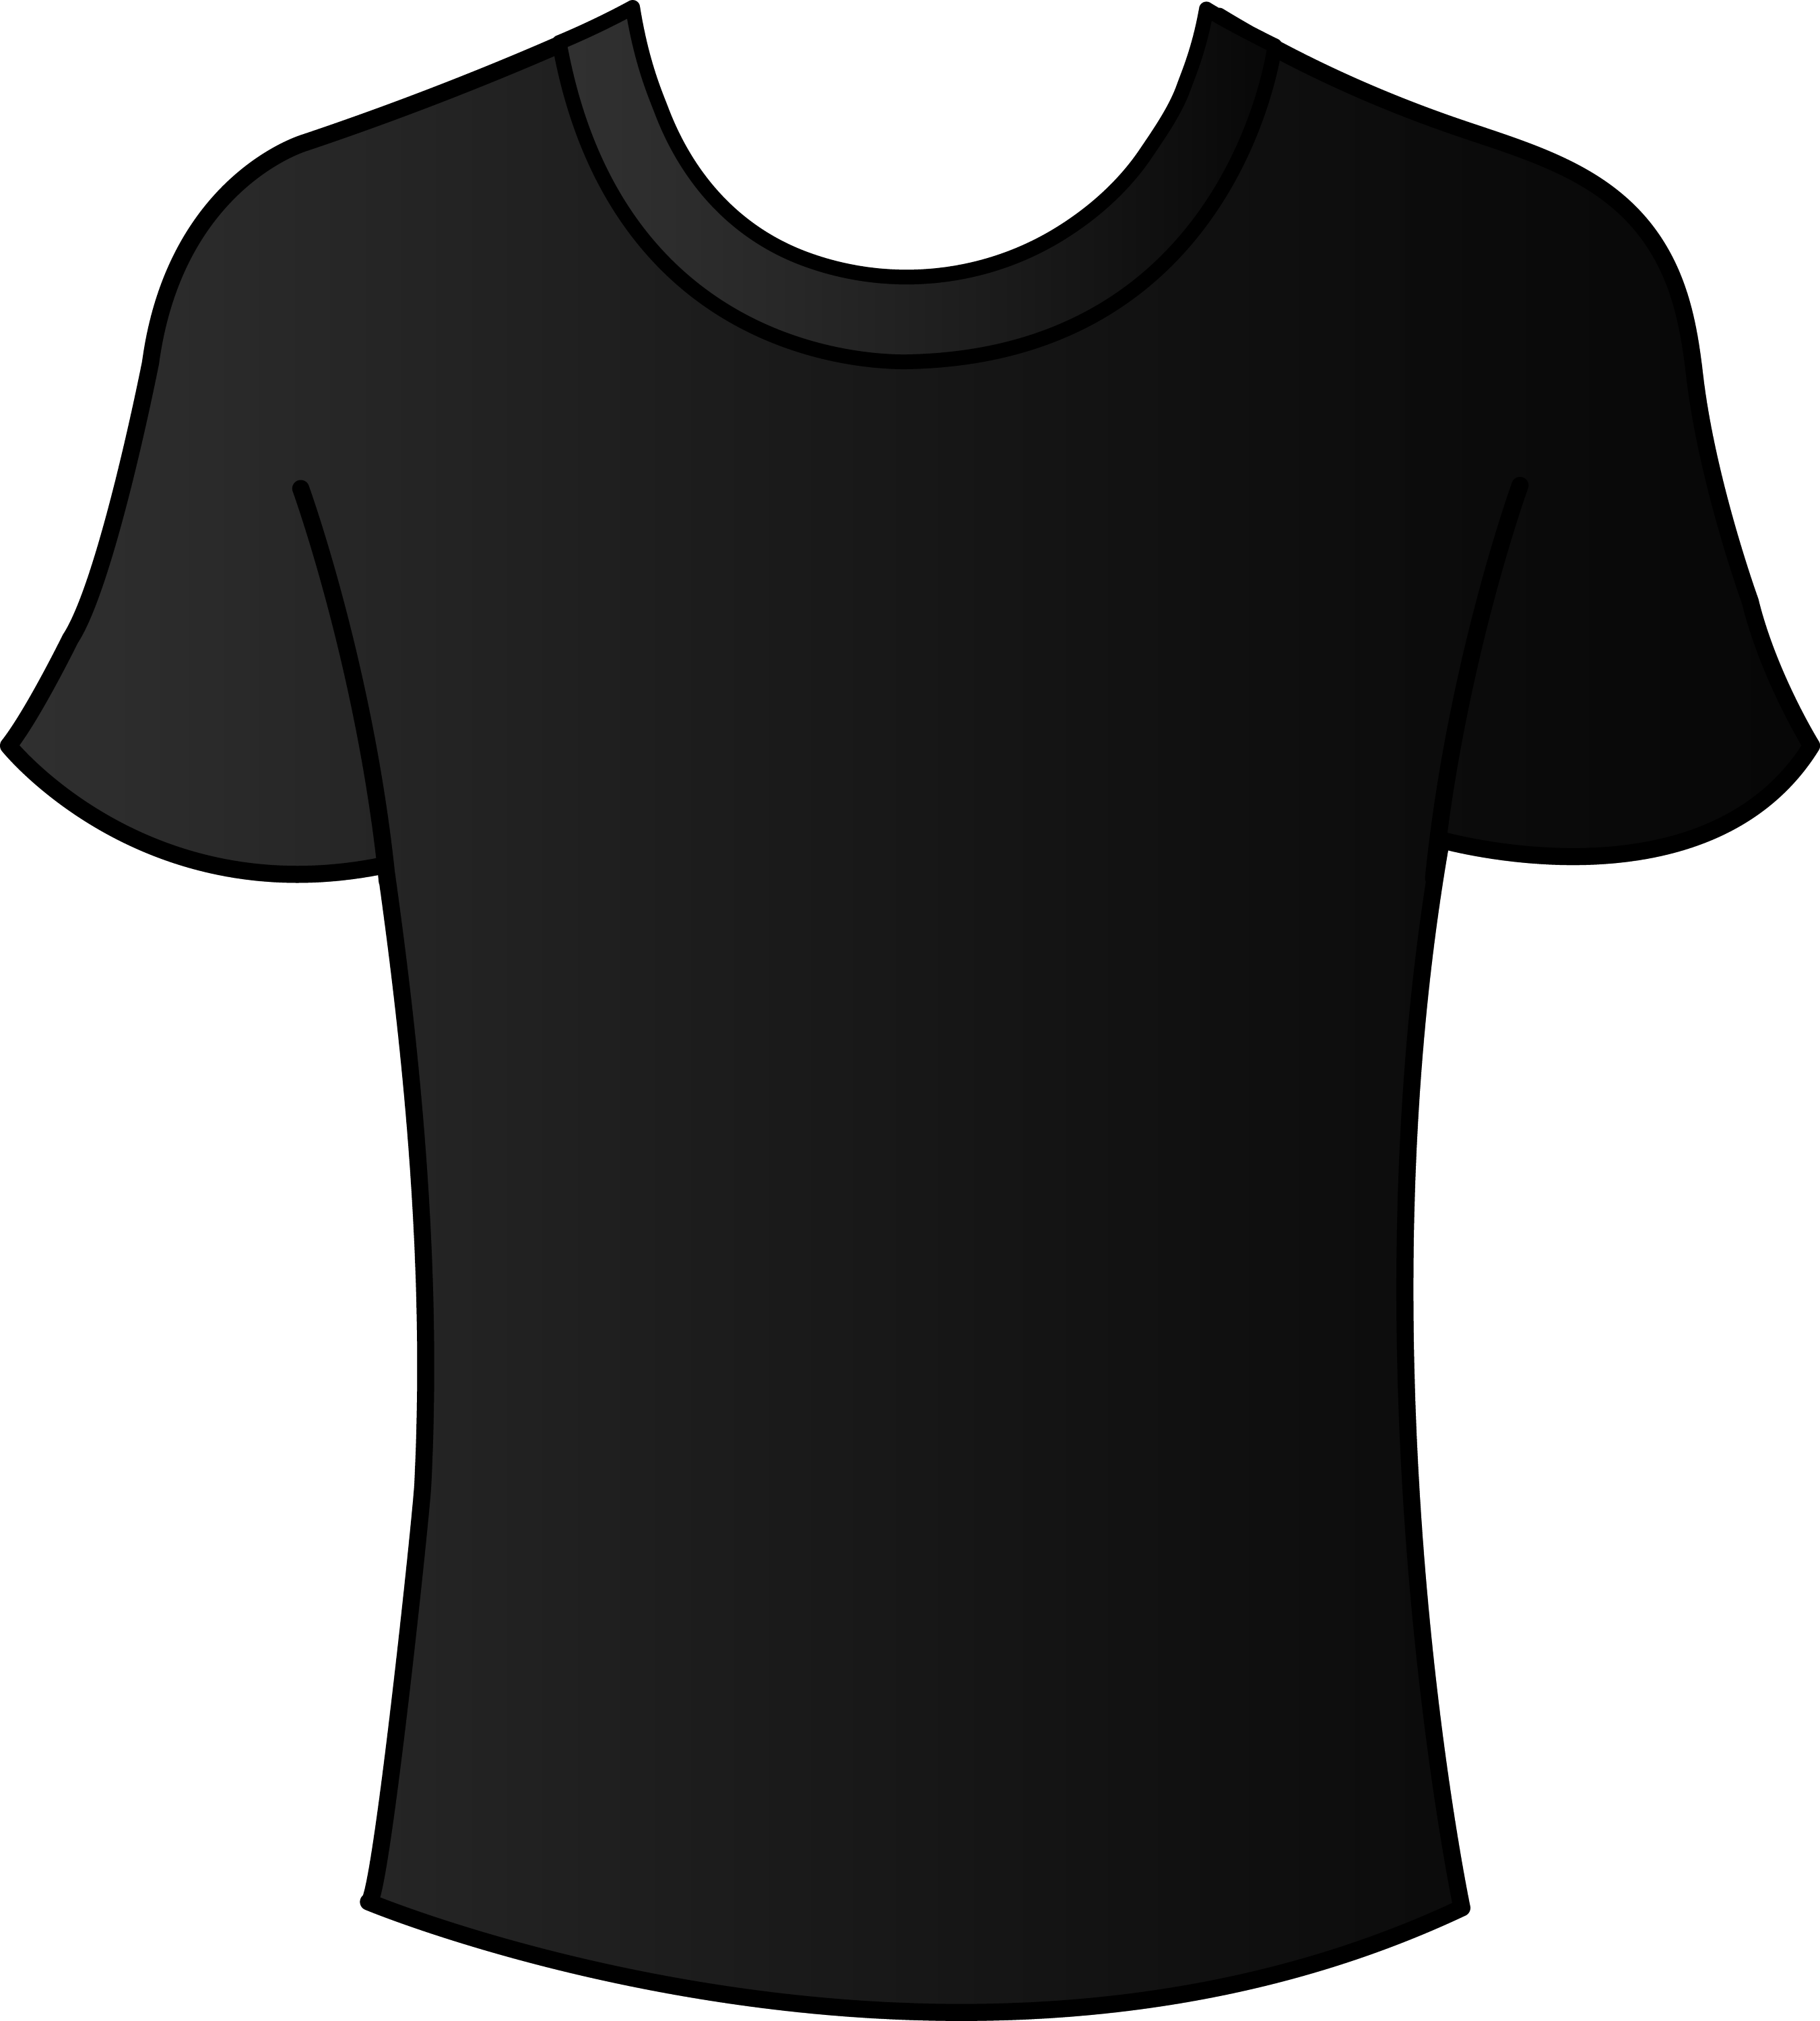 black-tshirt-template-png-collection-of-blank-black-t-shirt-png-23-white-blank-tshirt